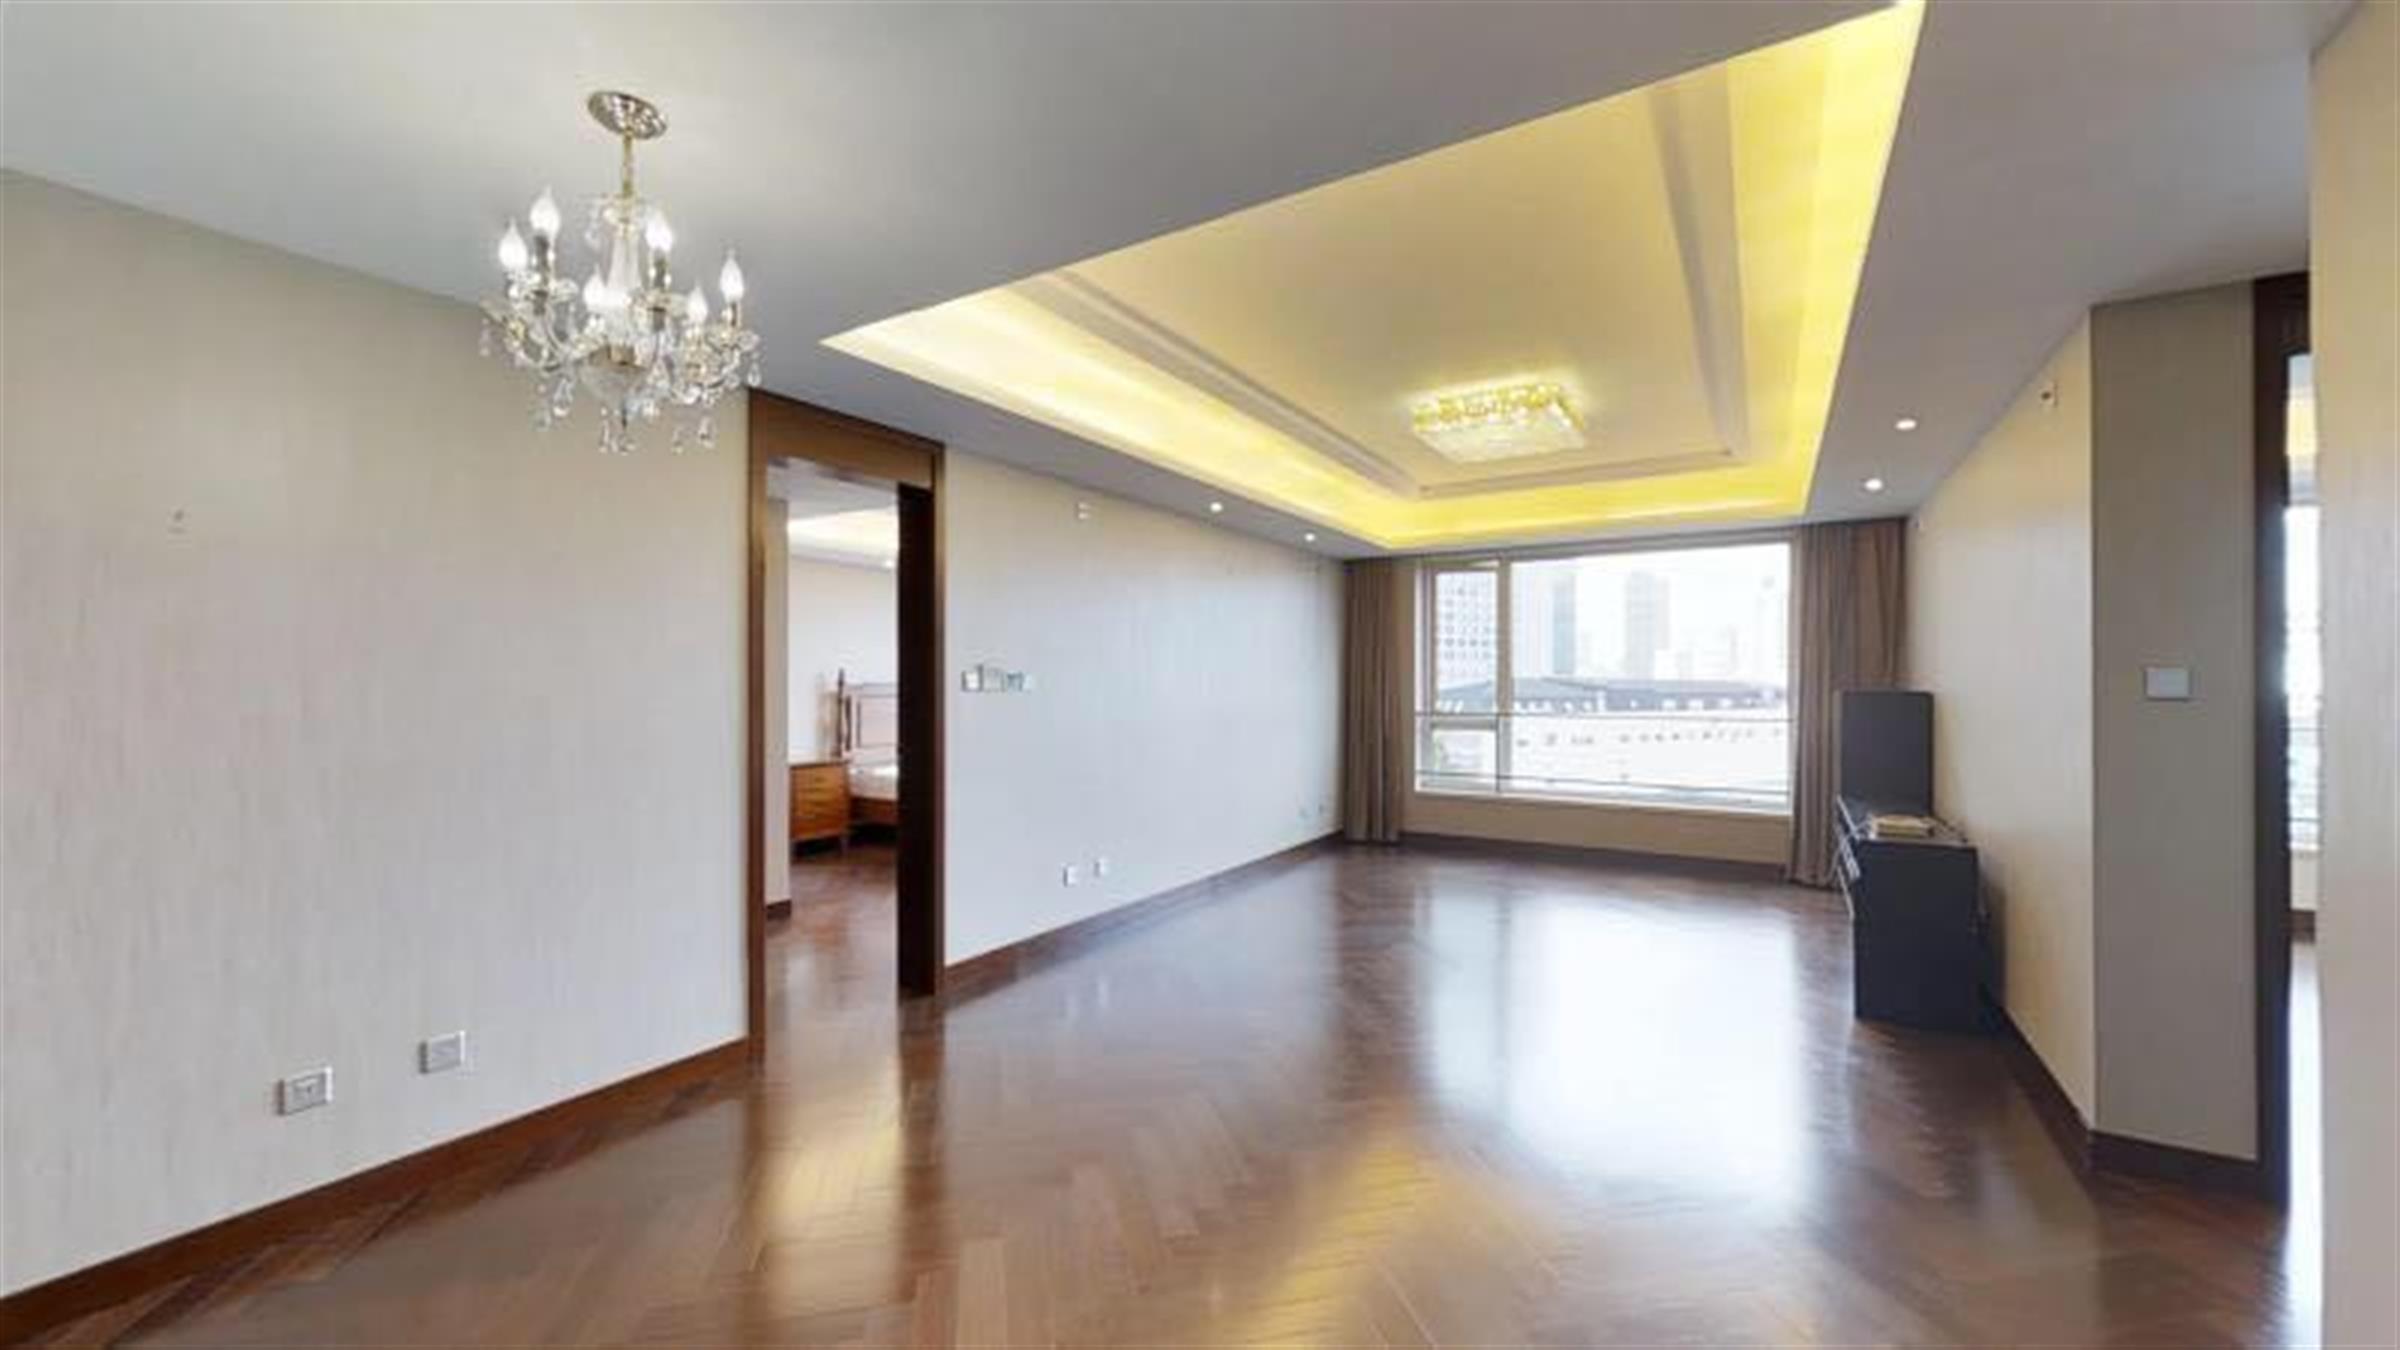 Long dinning room  New Luxury FFC Apartment in Paragon for Rent